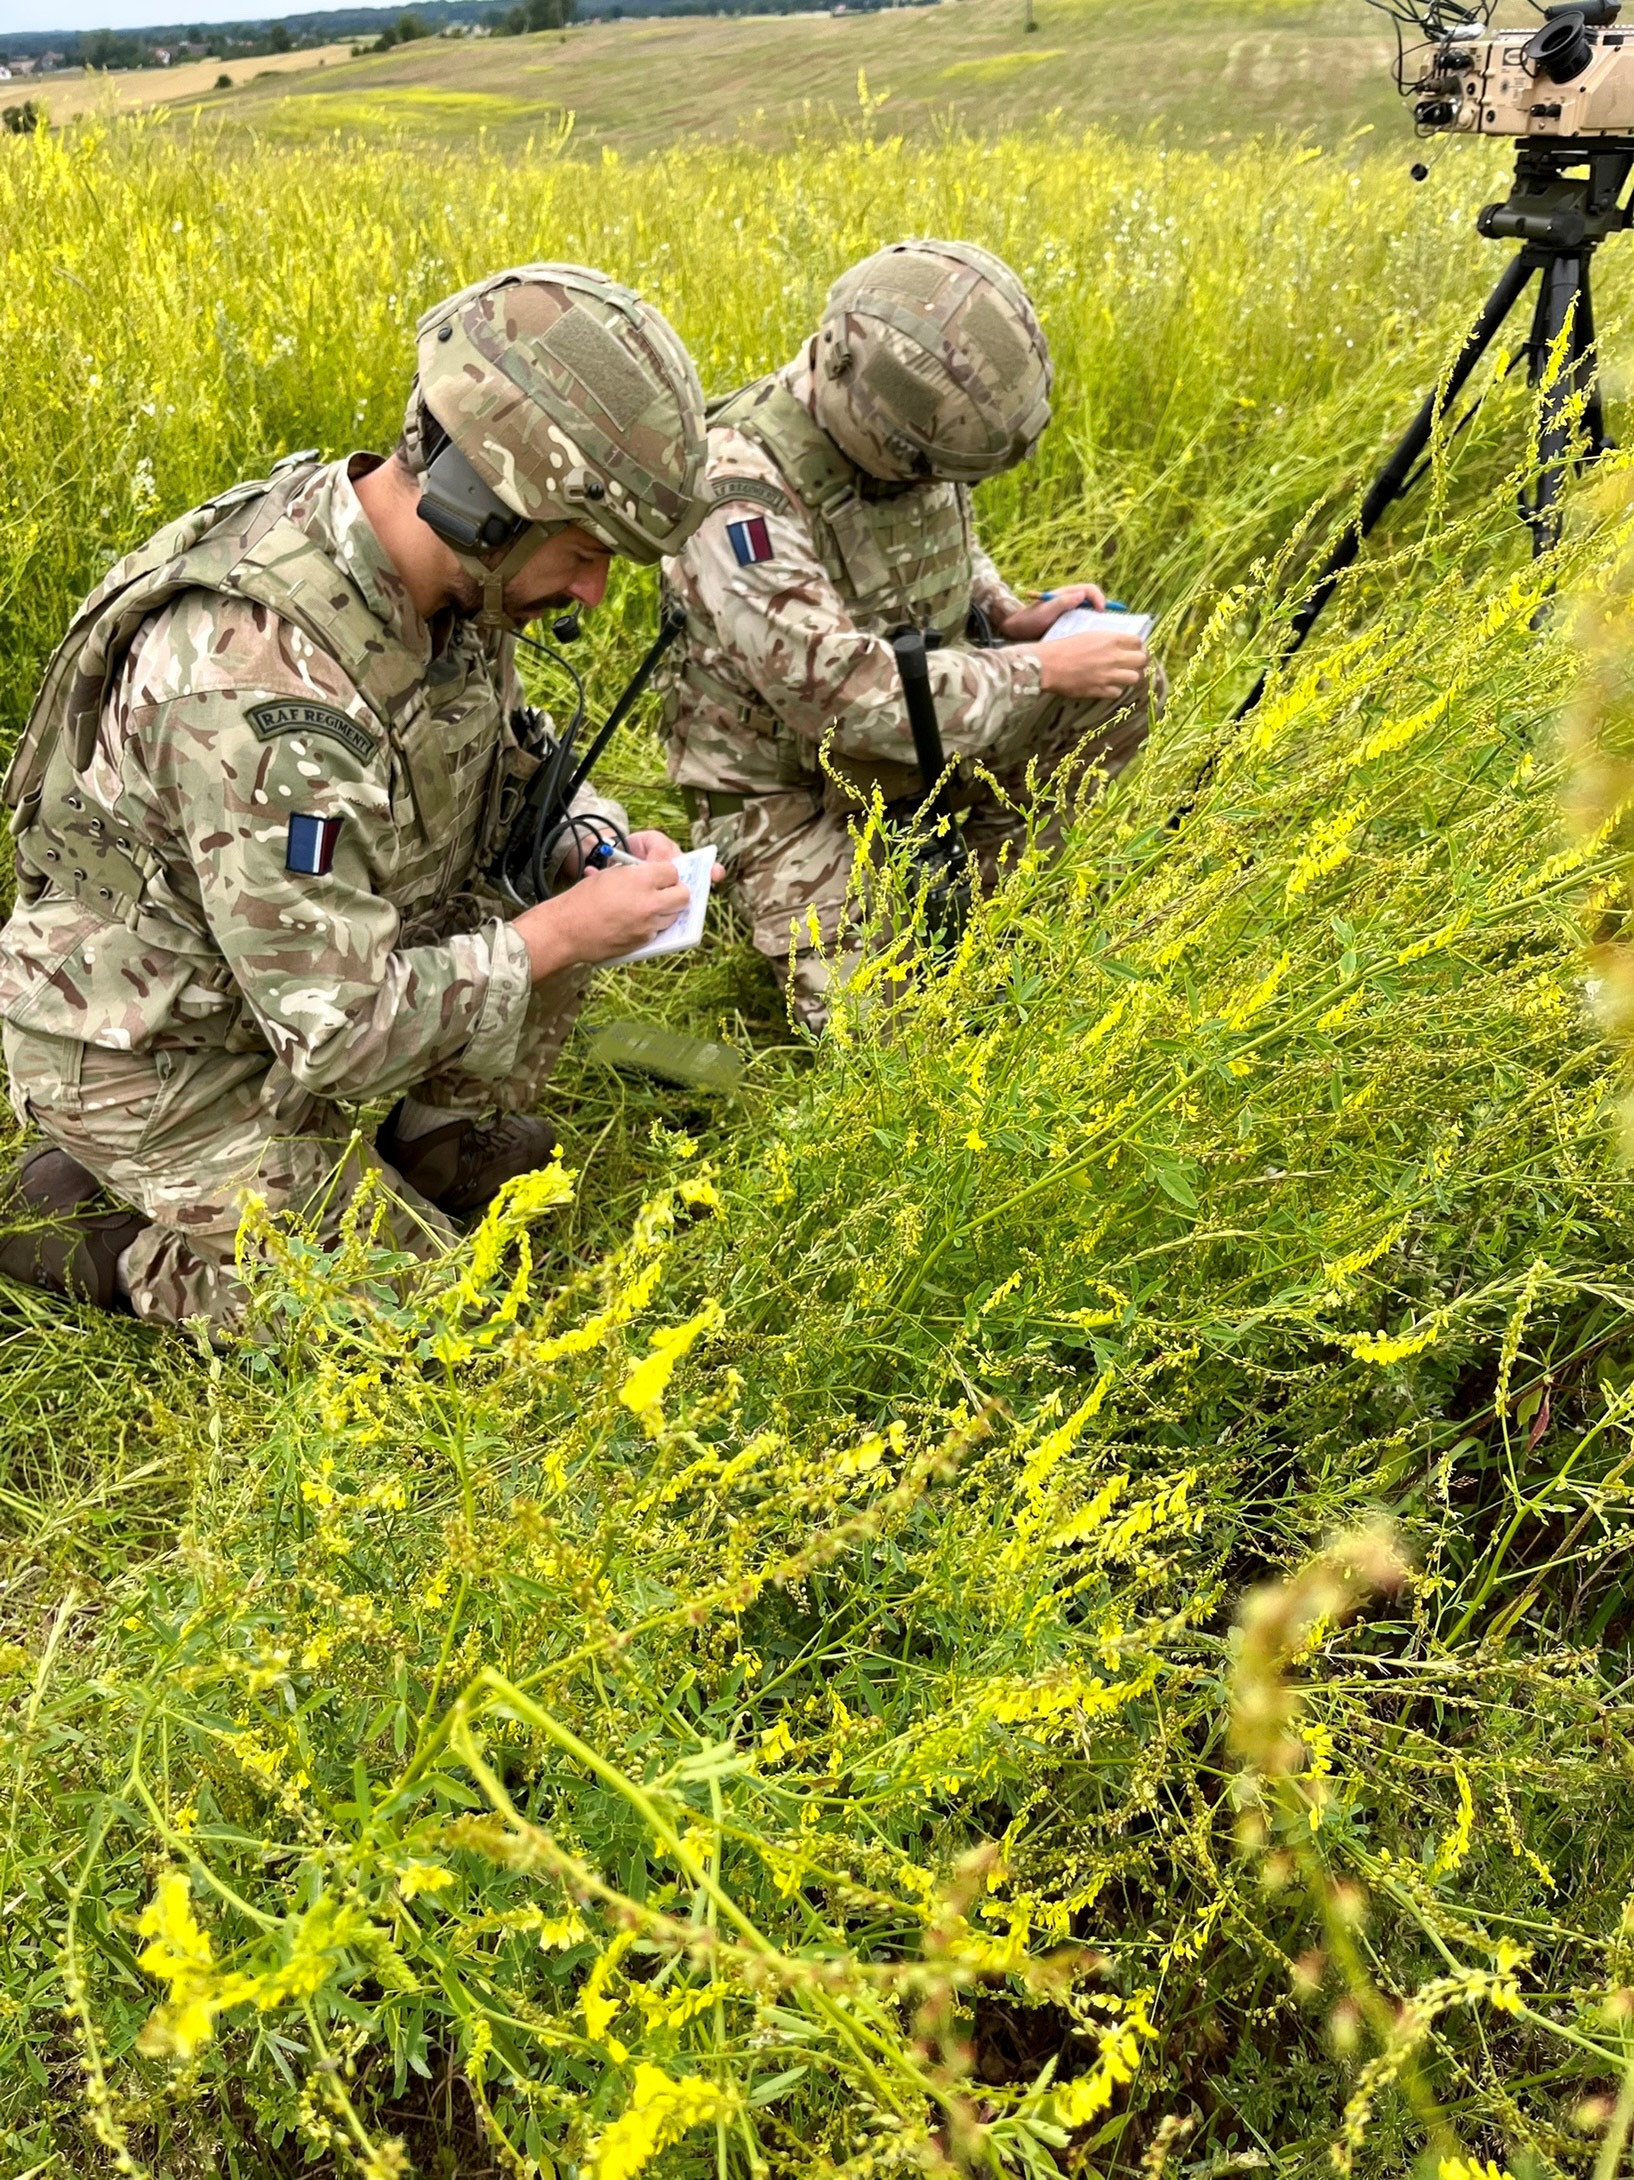 Image shows two RAF Regiment aviators crouching in the grass with ground-based laser designator.